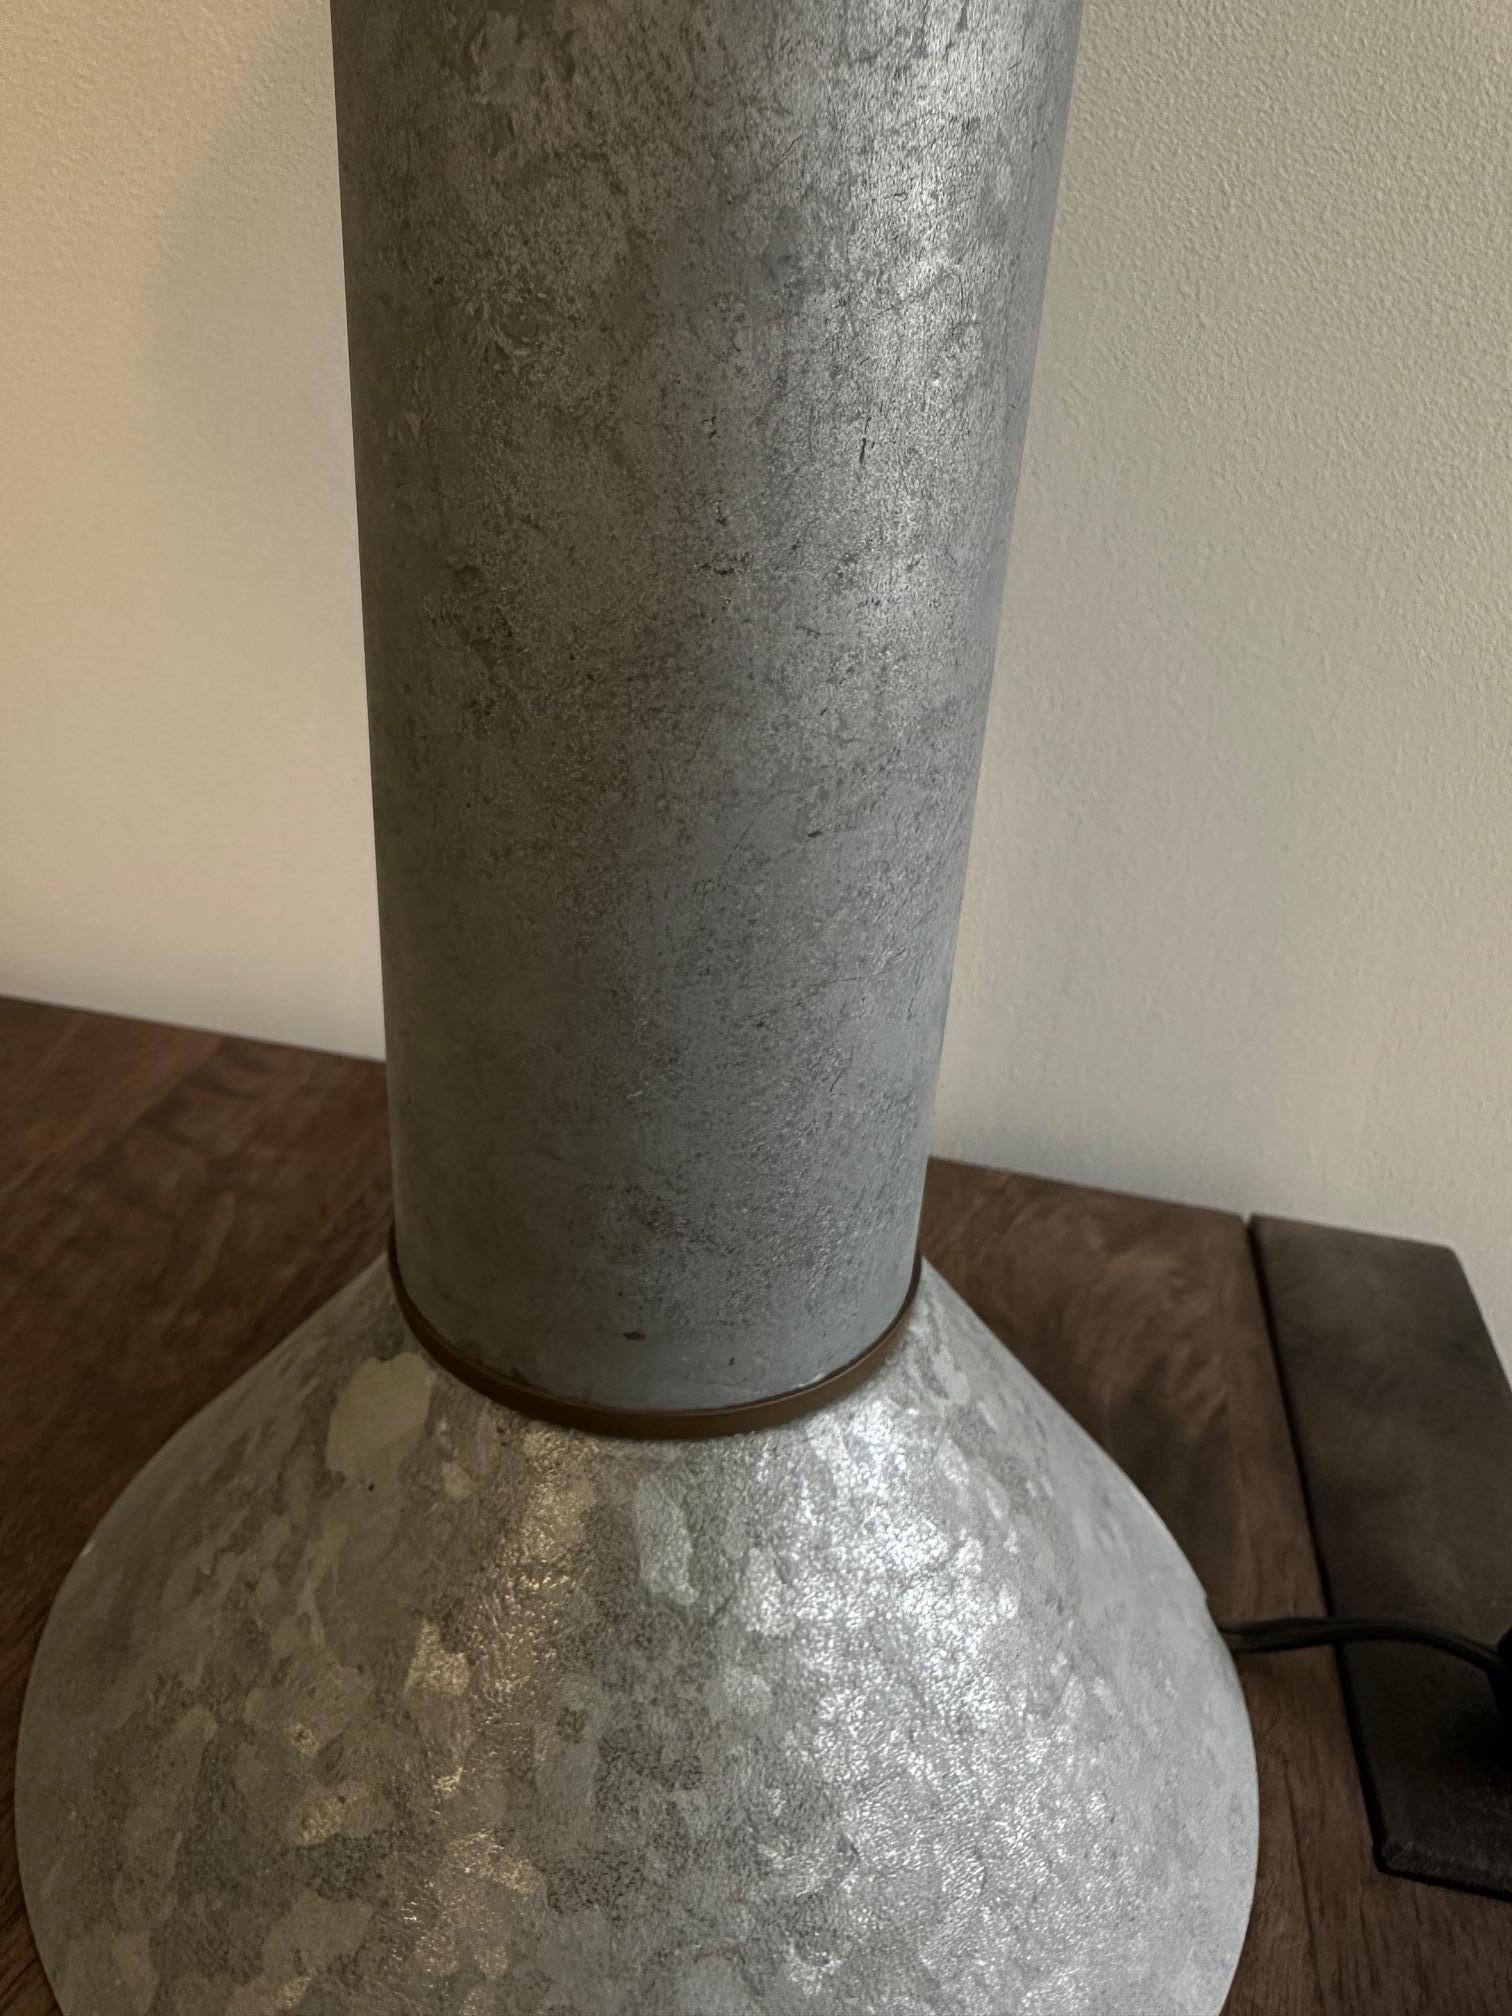 A rare table lamp designed by Ron Rezek, a famed industrial designer, circa 1980s. It is constructed with patinated Zinc and brass accent, reminiscent of the zinc tables designed by John Dickinson. The shade is adorned with cutout to allow the light